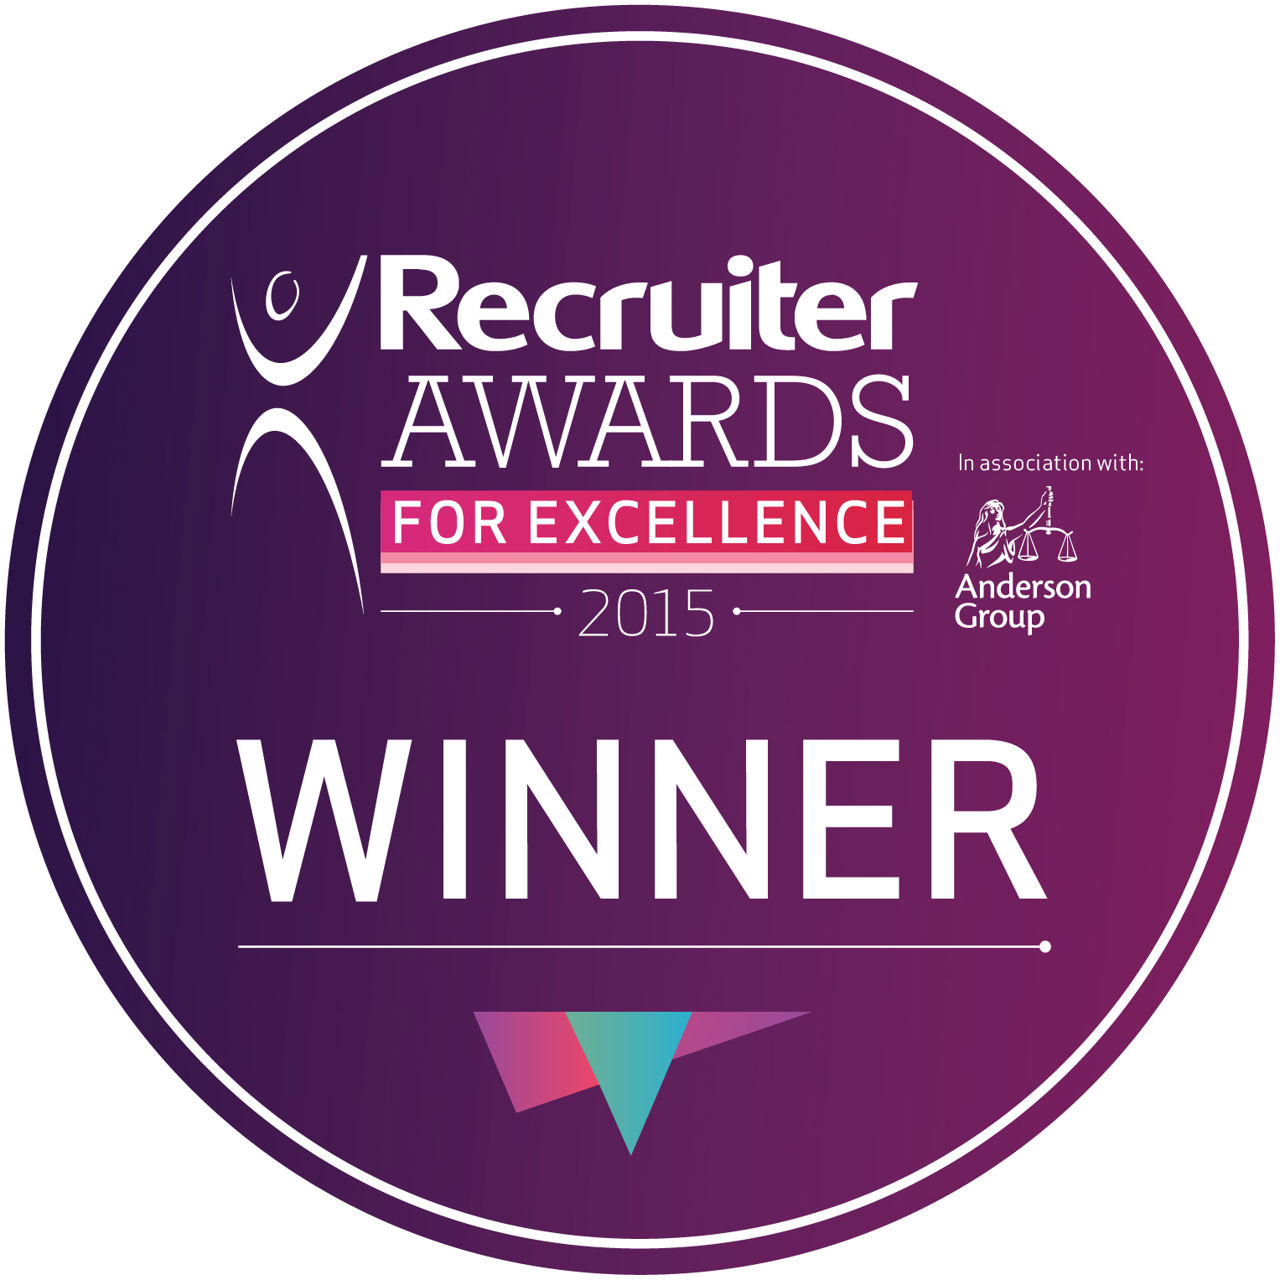 Recruiter Awards for Excellence 2015